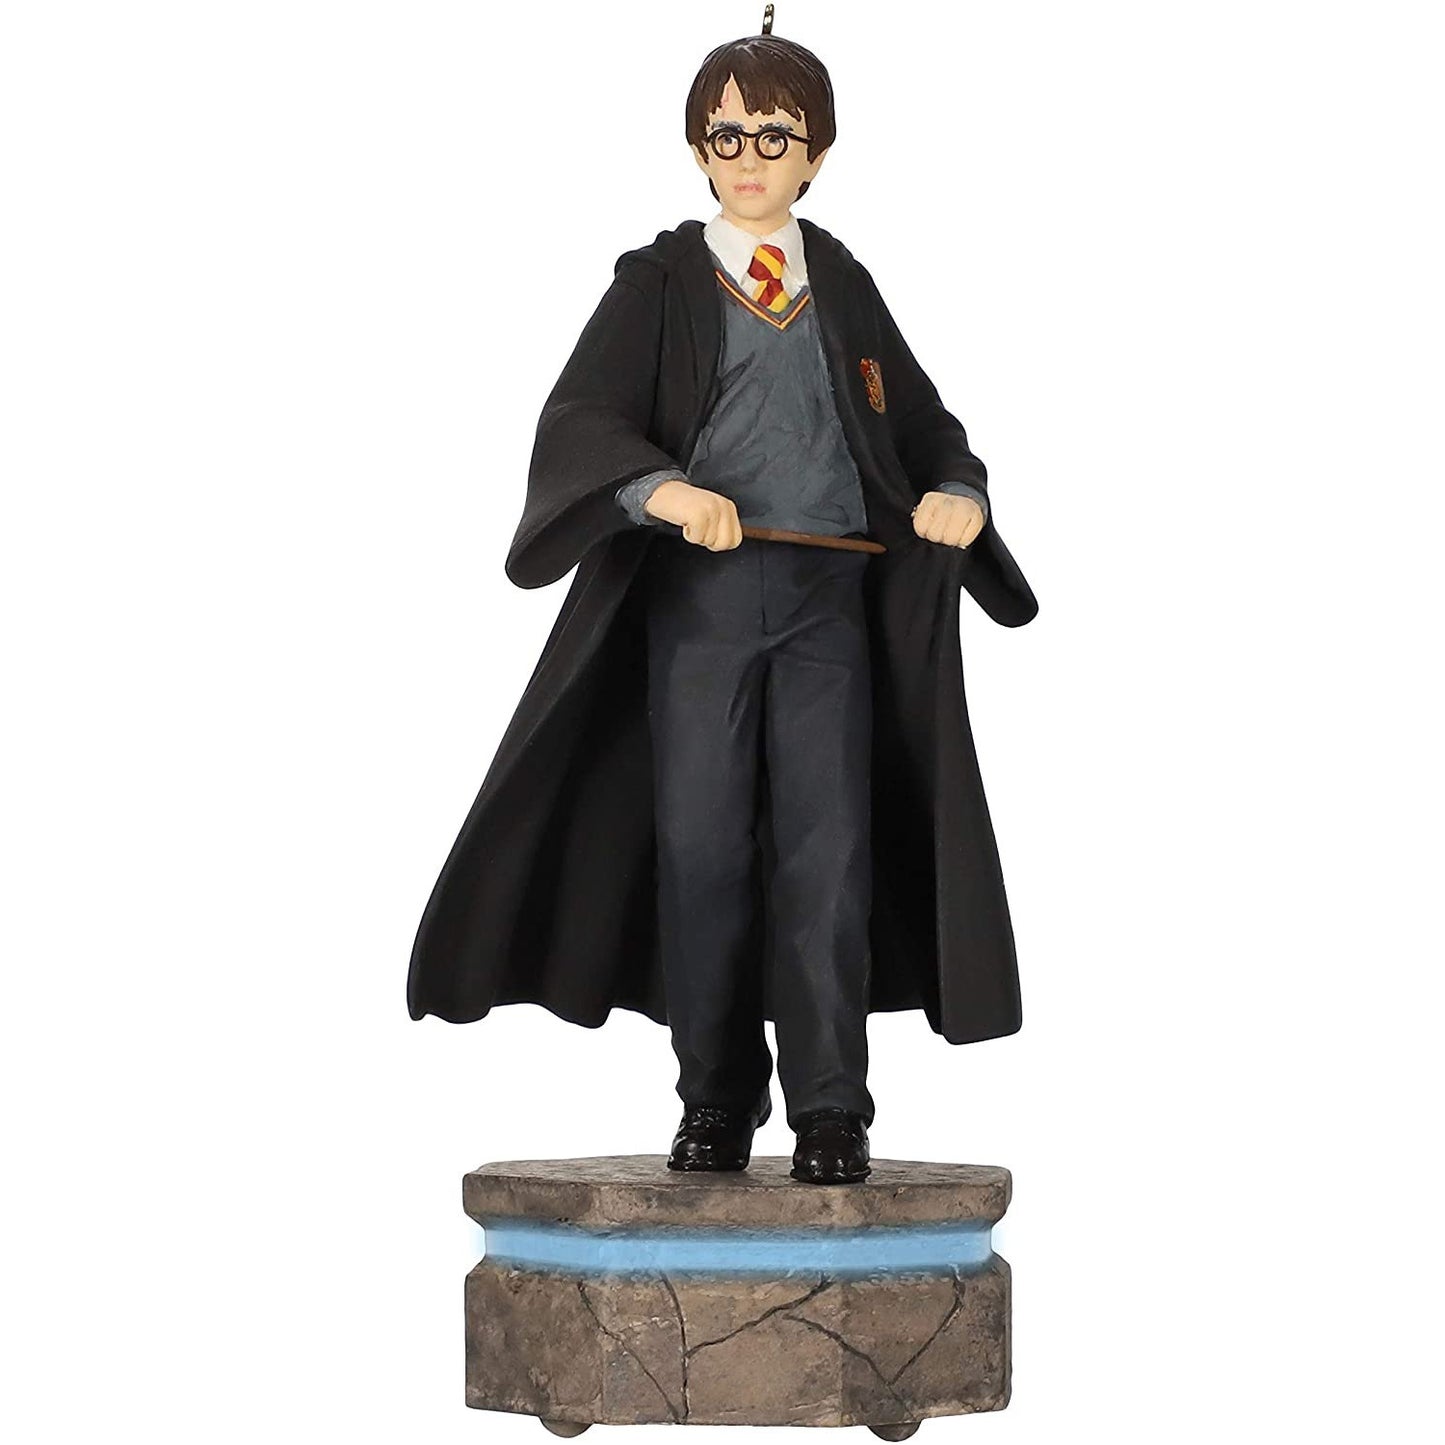 Hallmark Keepsake Christmas Ornament 2020, Harry Potter Collection Harry Potter Storytellers With Light and Sound